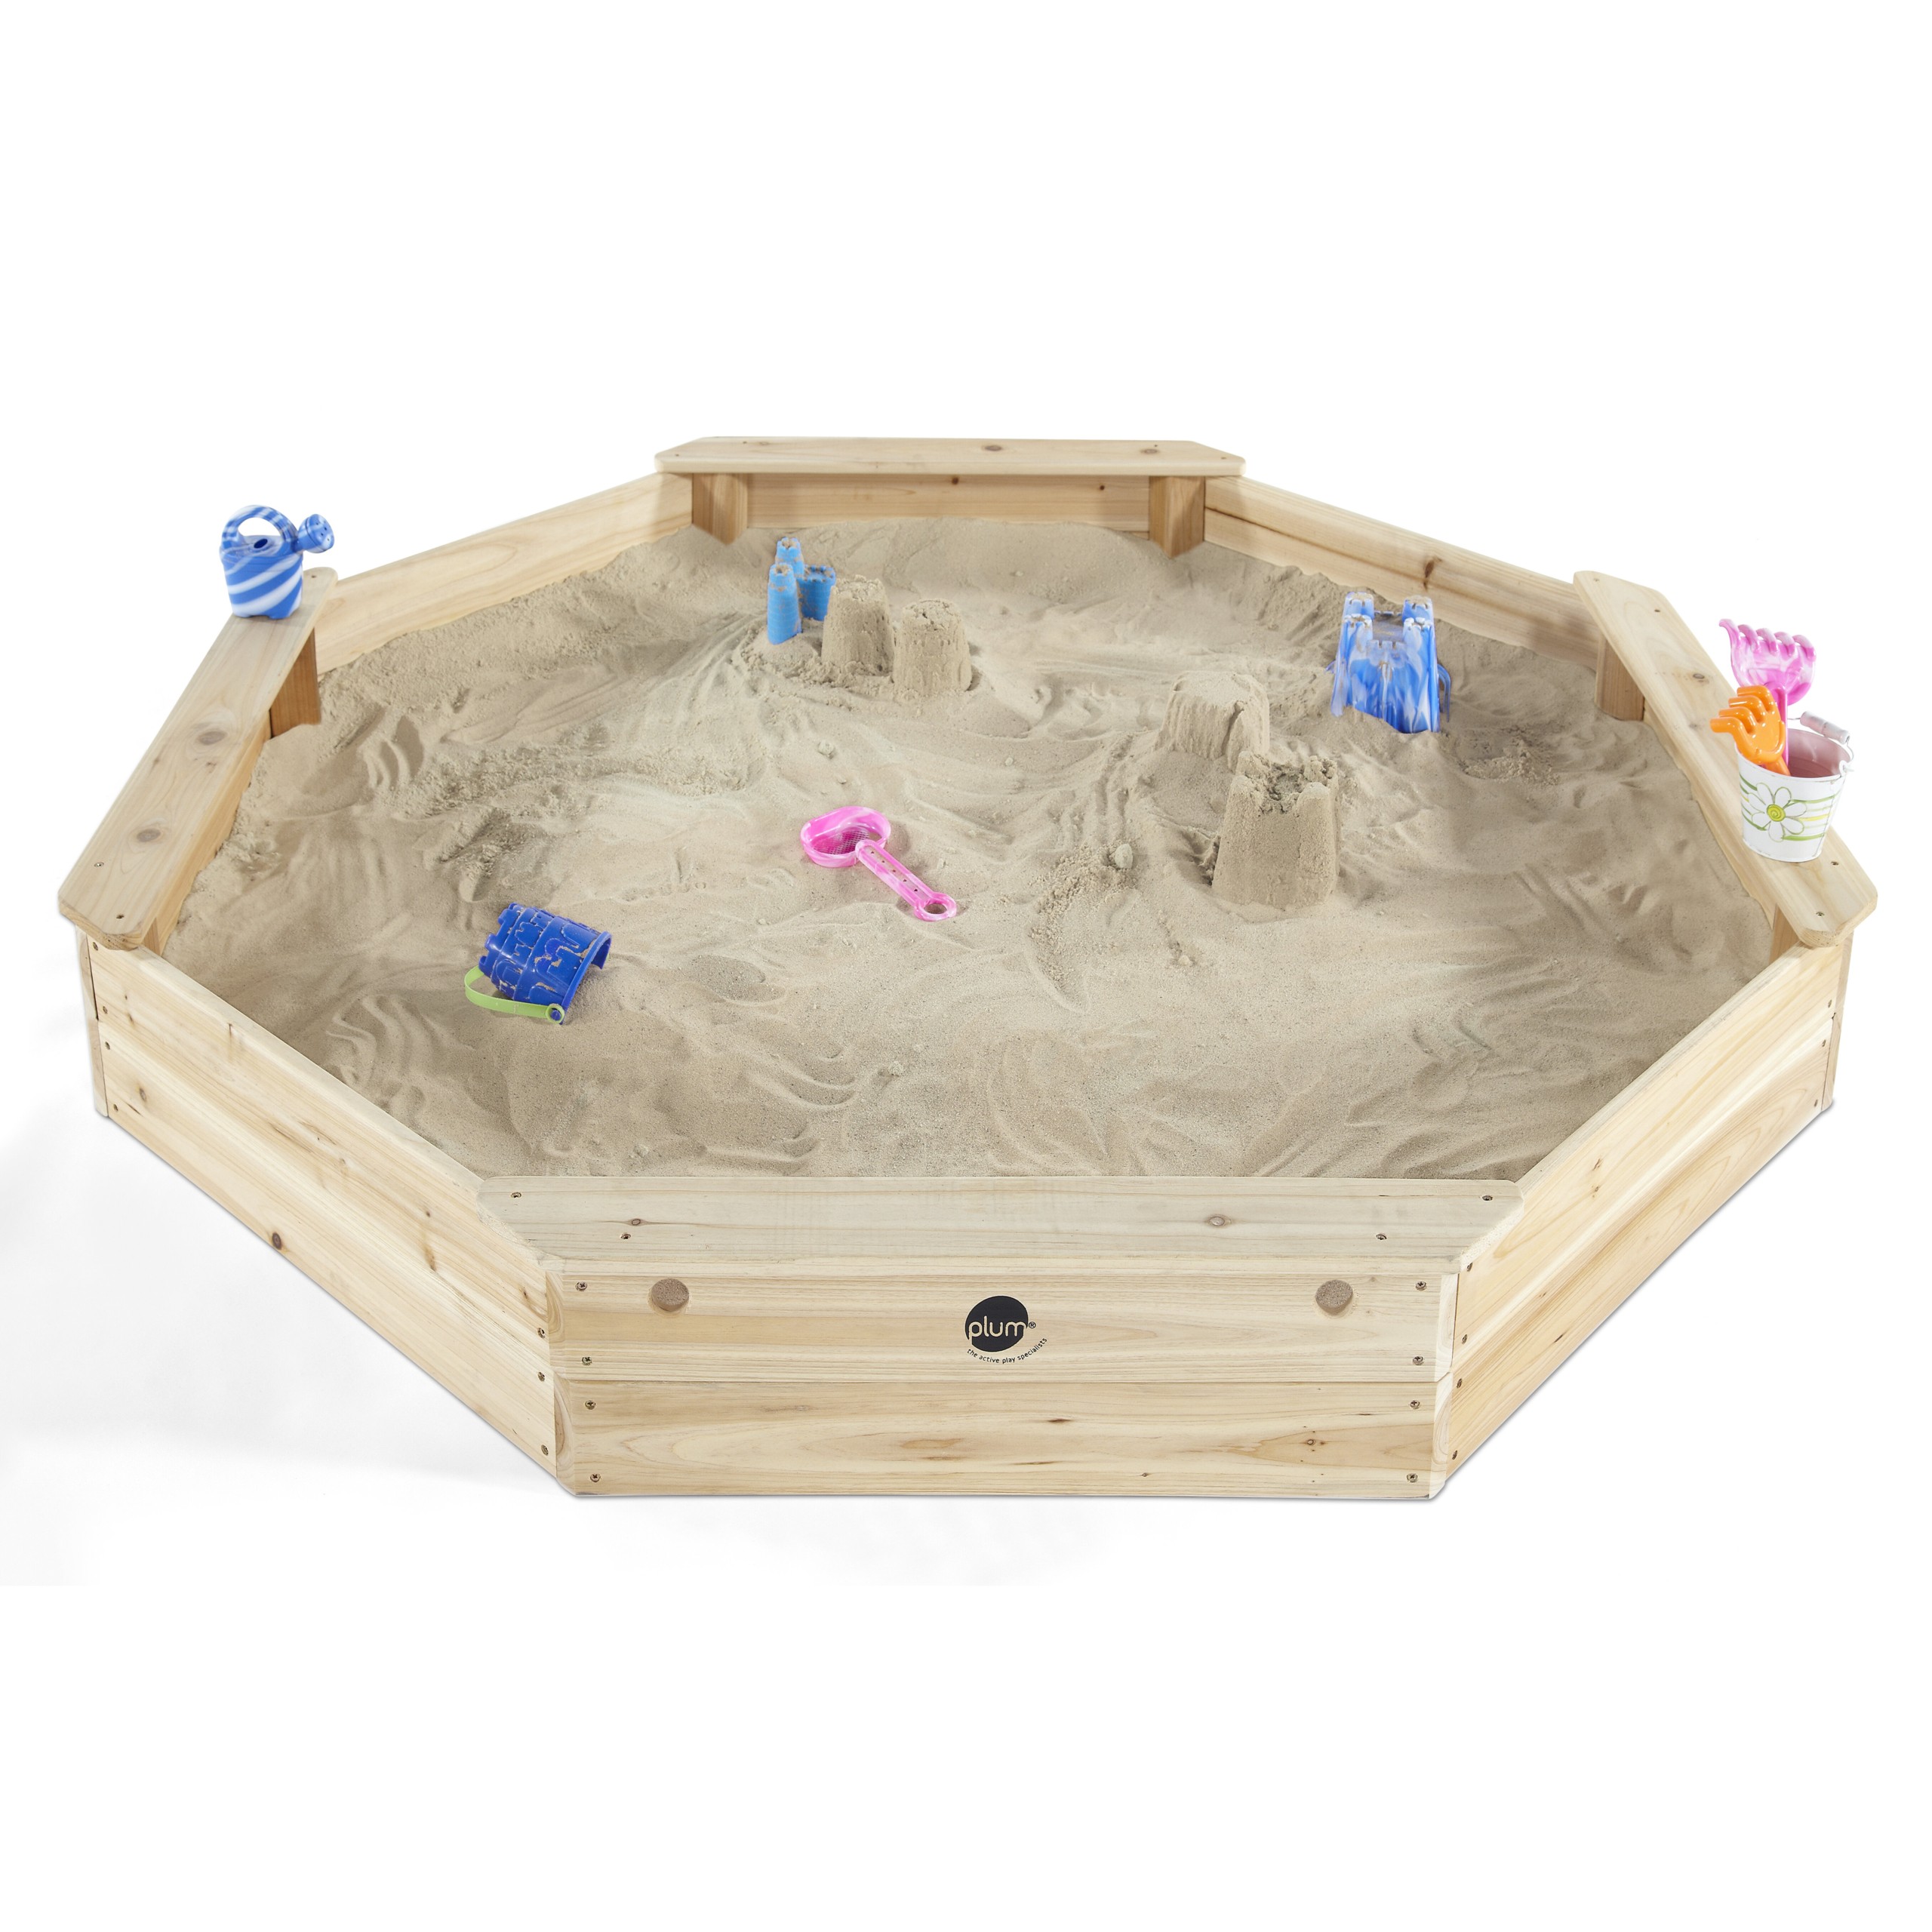 70" x 9" Solid Wood Hexagonal Sandbox with Cover